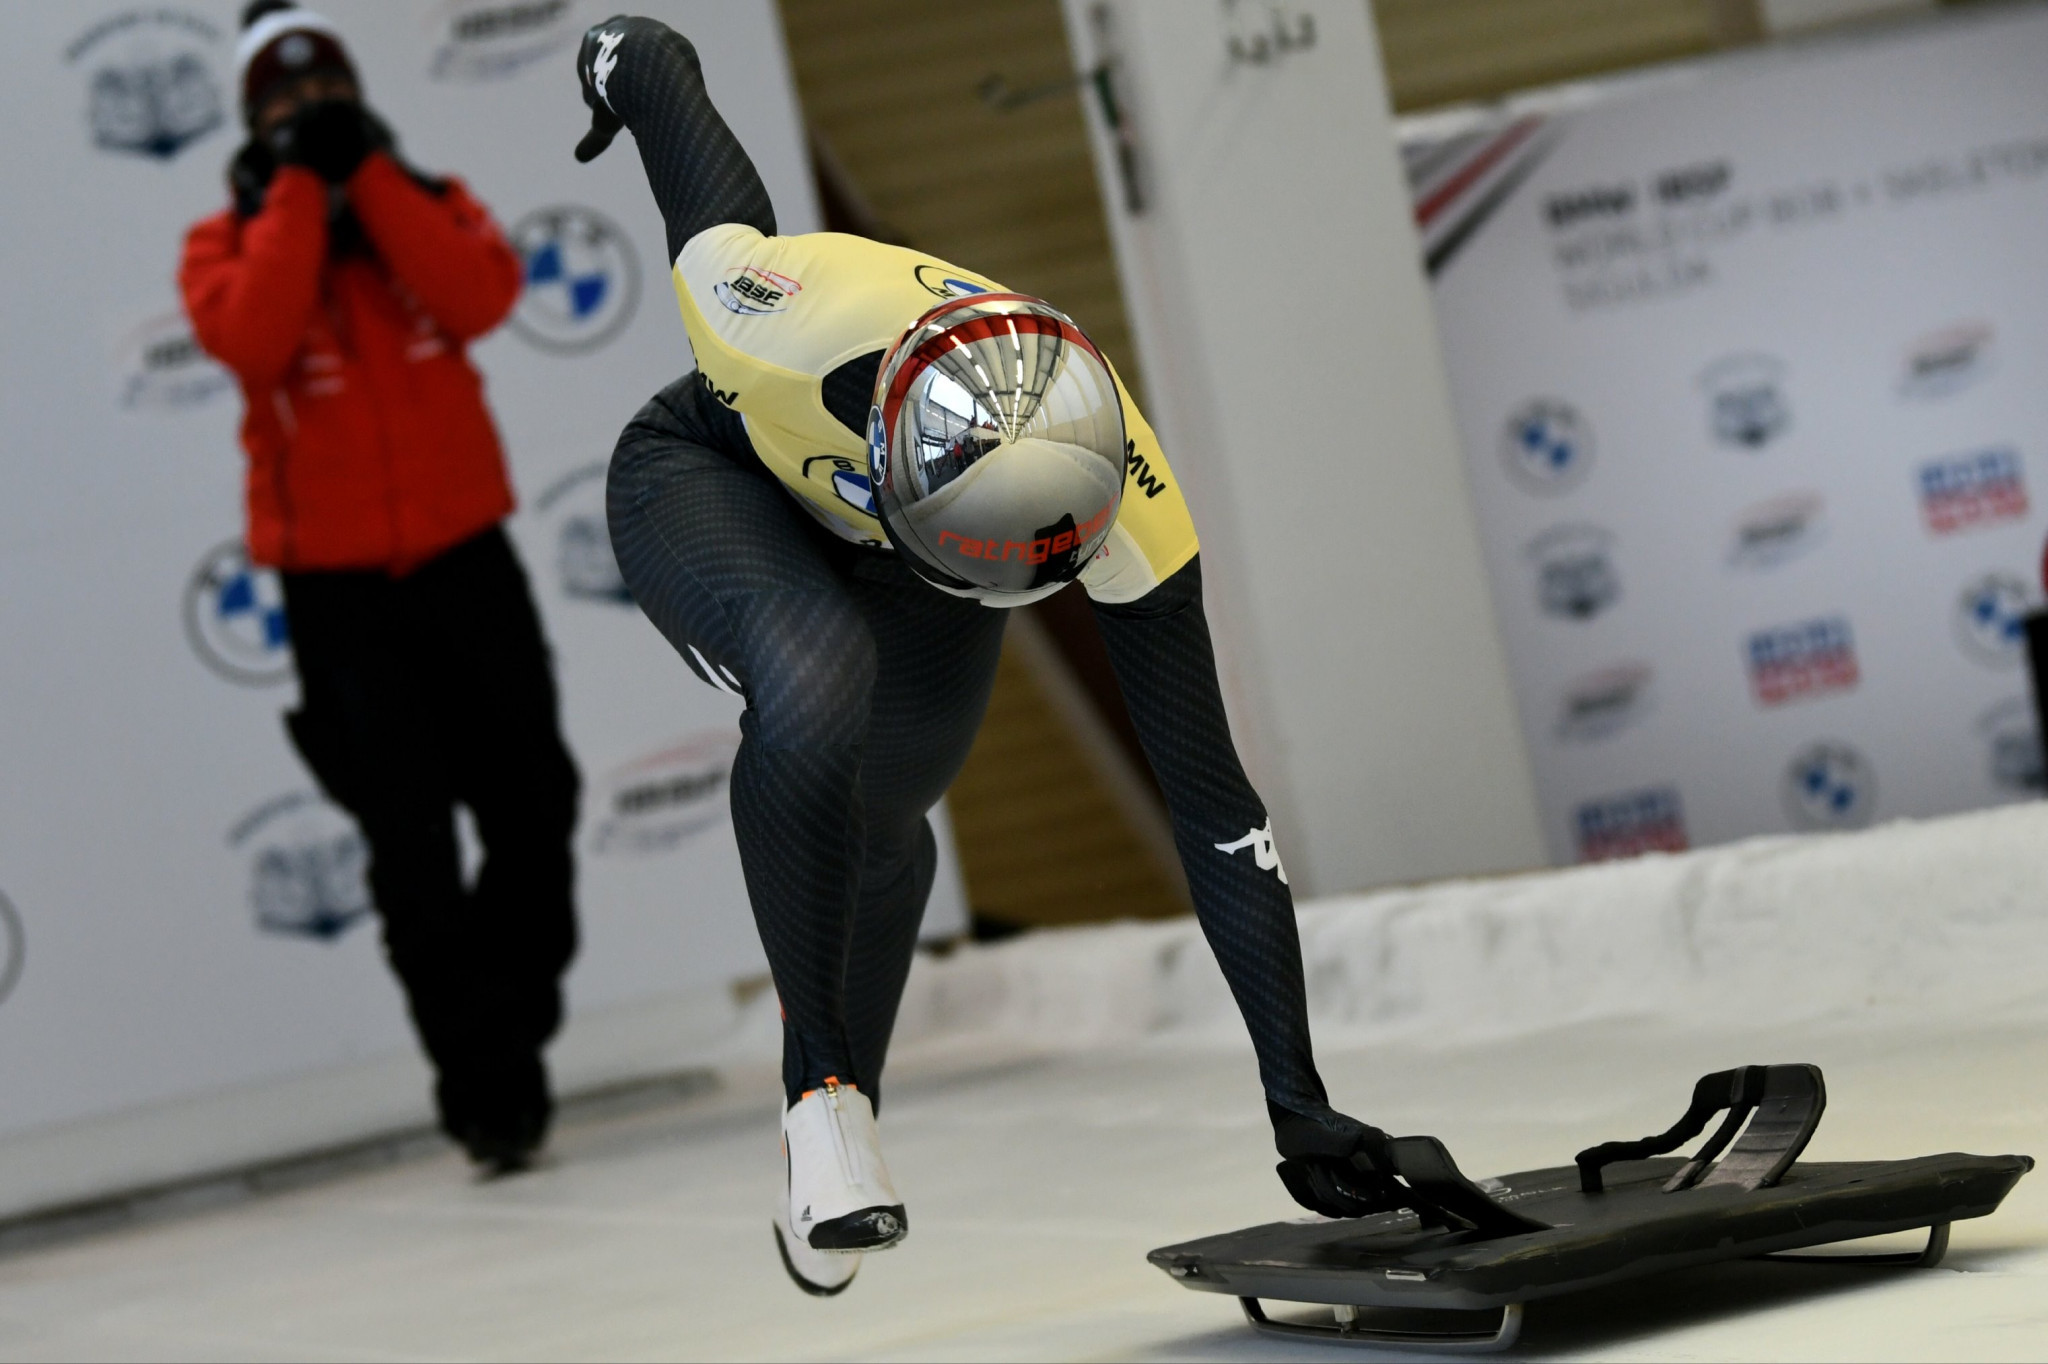 Janine Flock won the women's event for a second week running ©IBSF